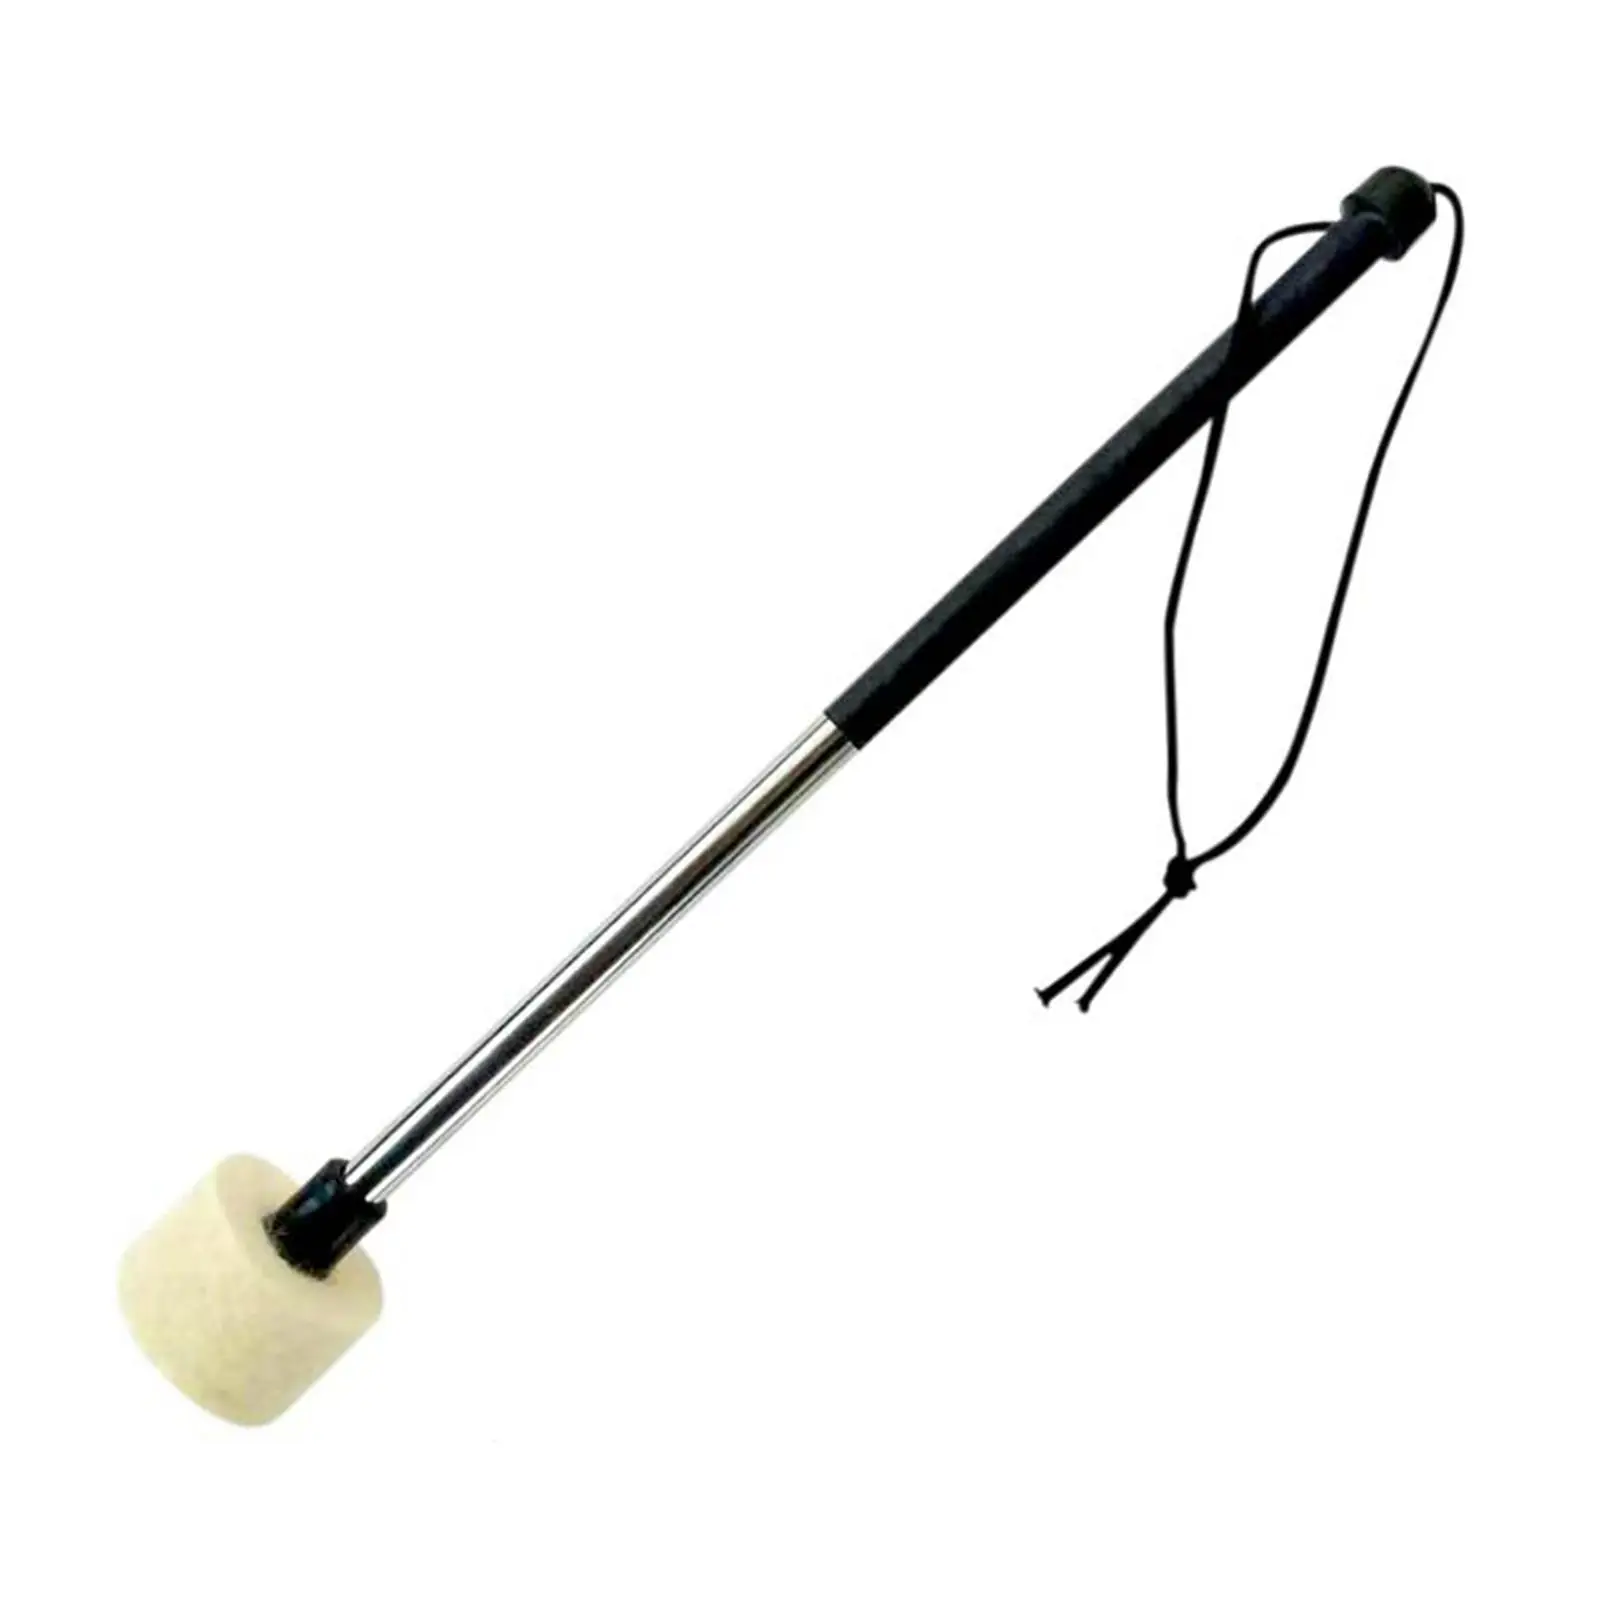 Multipurpose Percussion Mallet Musical Instrument Accessories Durable Felt for Snare Drums Kids Student Children Toddler